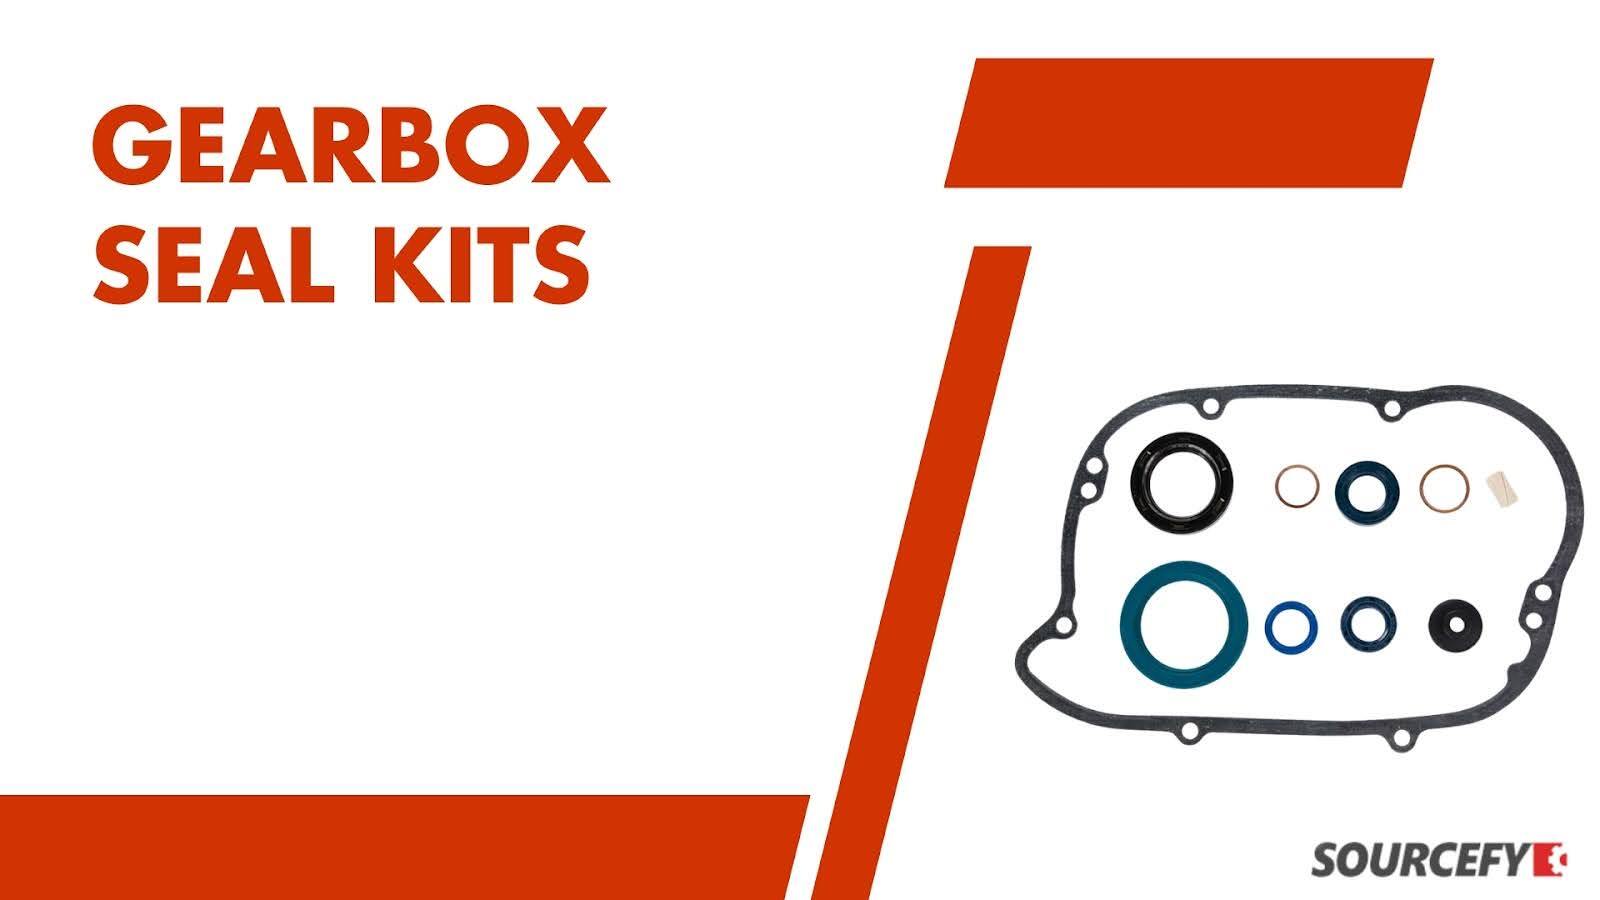 Gearbox Seal Kits